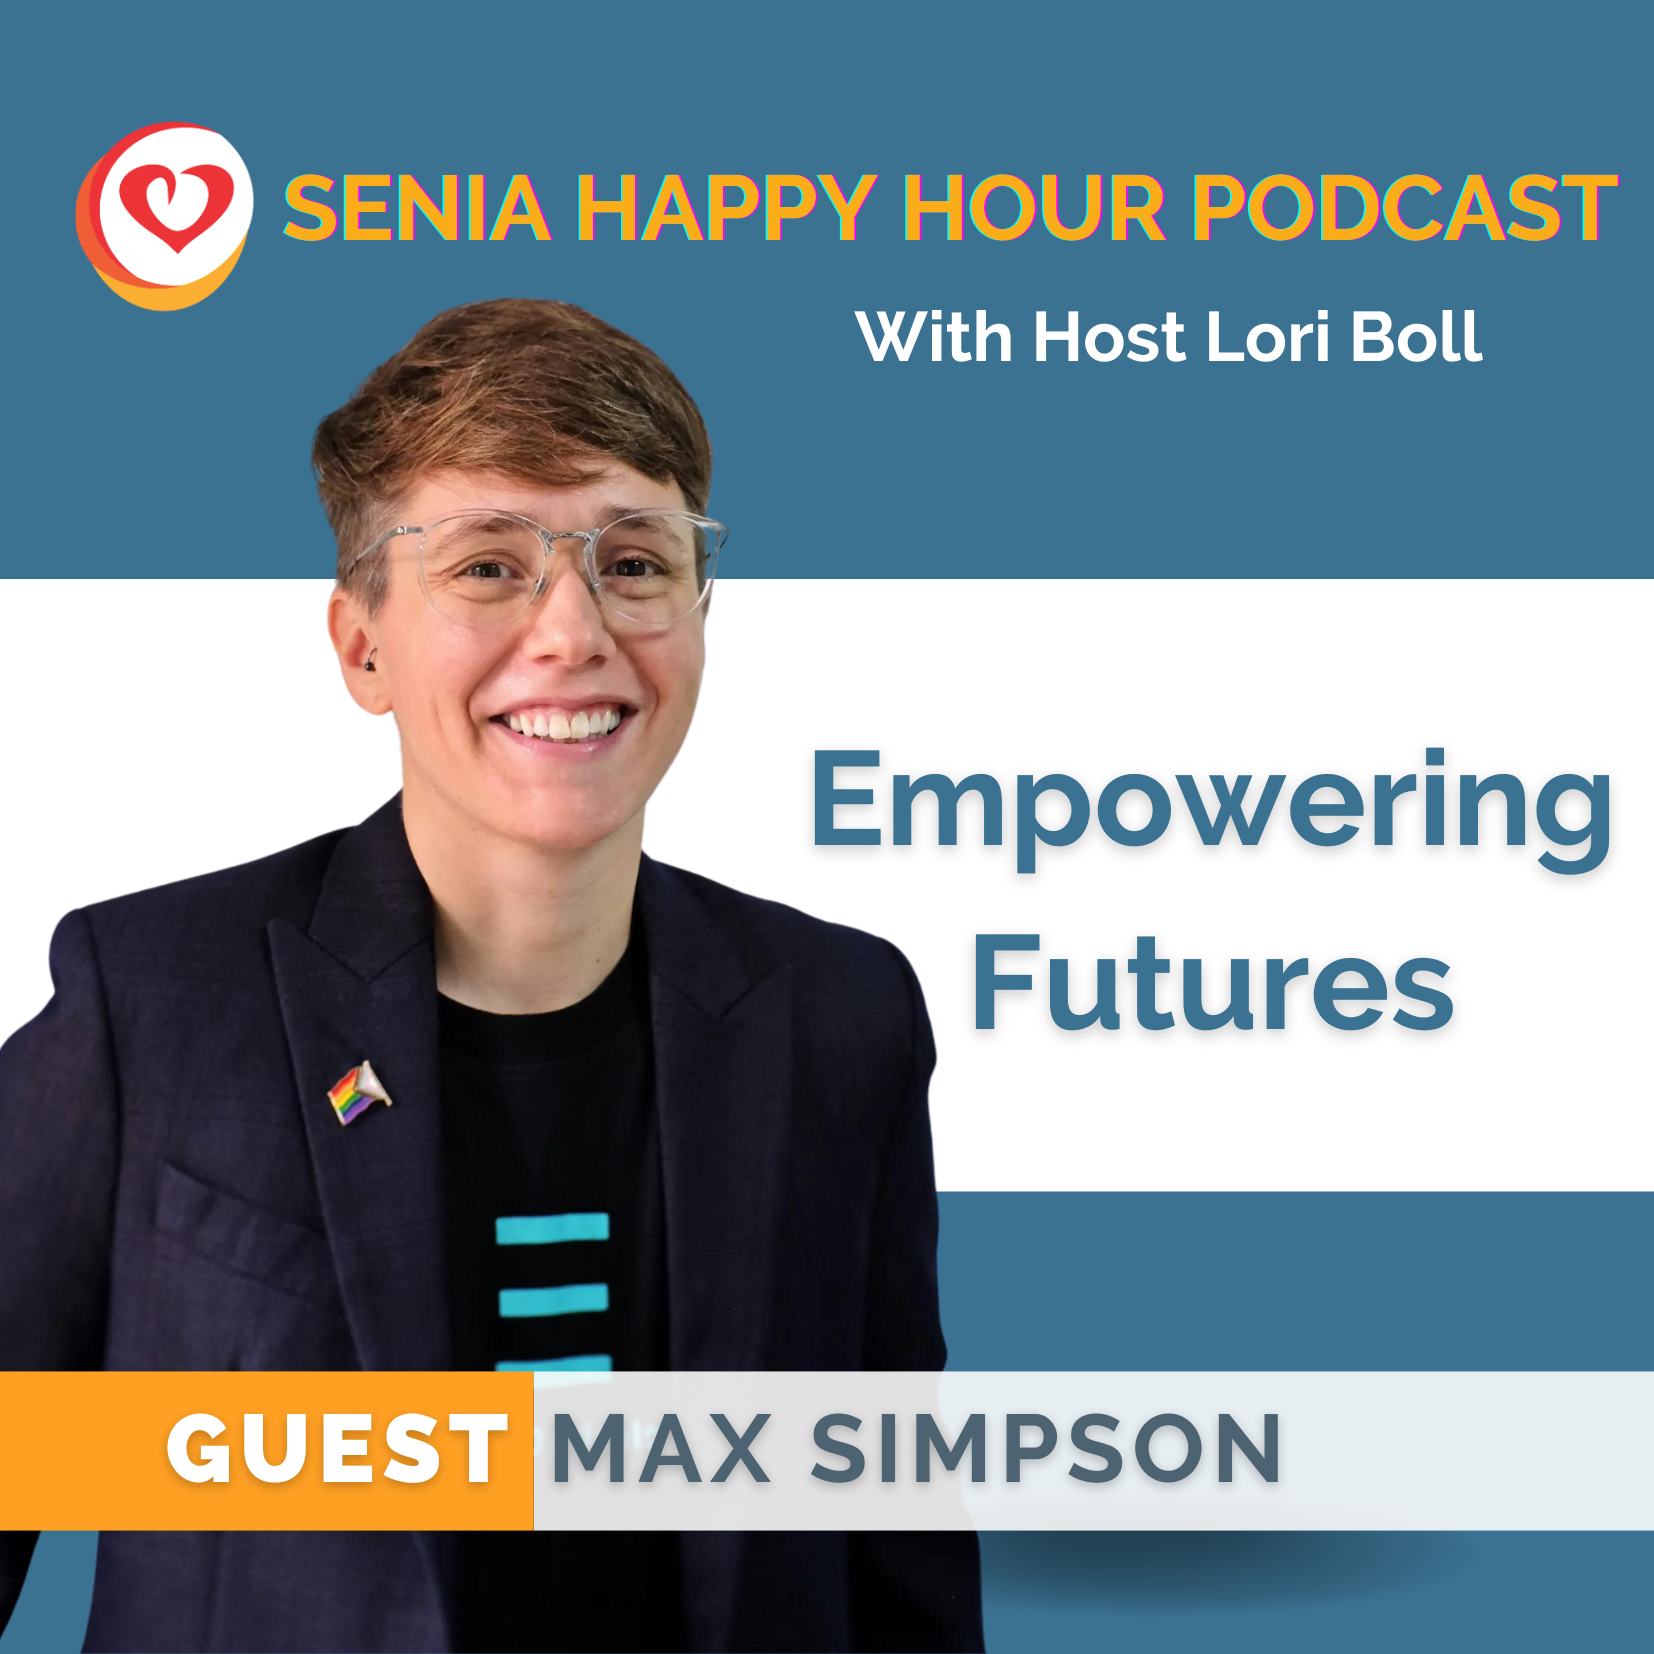 Poster for SENIA Happy Hour Podcast with Host Lori Boll. Title ''The Importance of Exercise in the Classroom'' Guests David Geslak & Amber Pantaleo and an image of David (Male with short dark hair in a blue zip shirt) and Amber (Female with long, wavy hair and blue shirt)